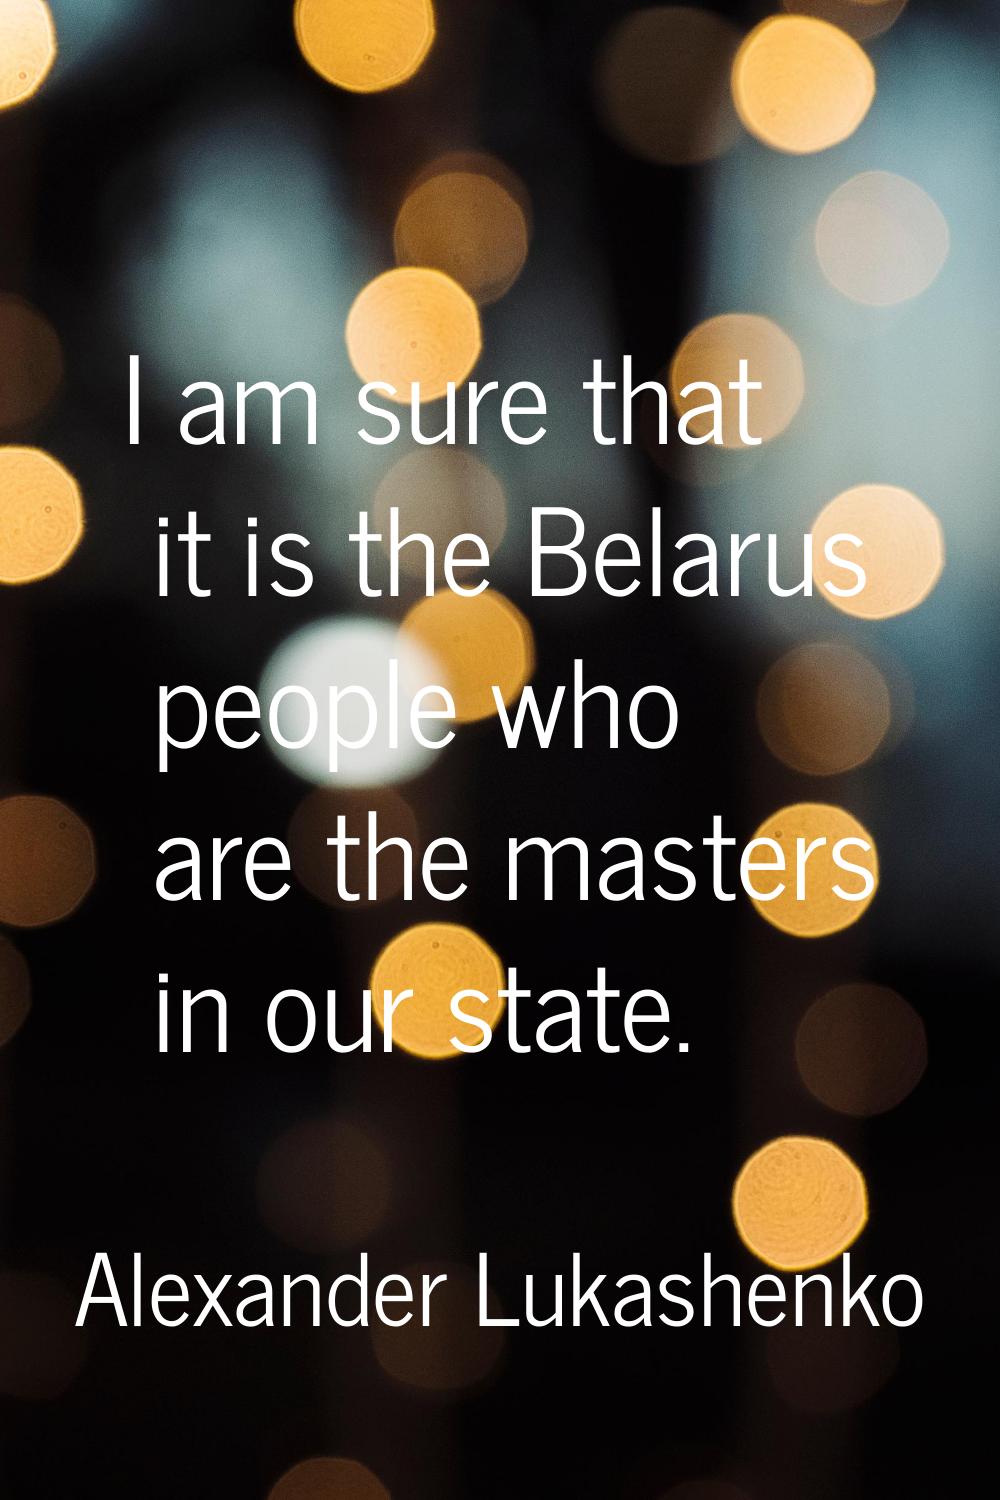 I am sure that it is the Belarus people who are the masters in our state.